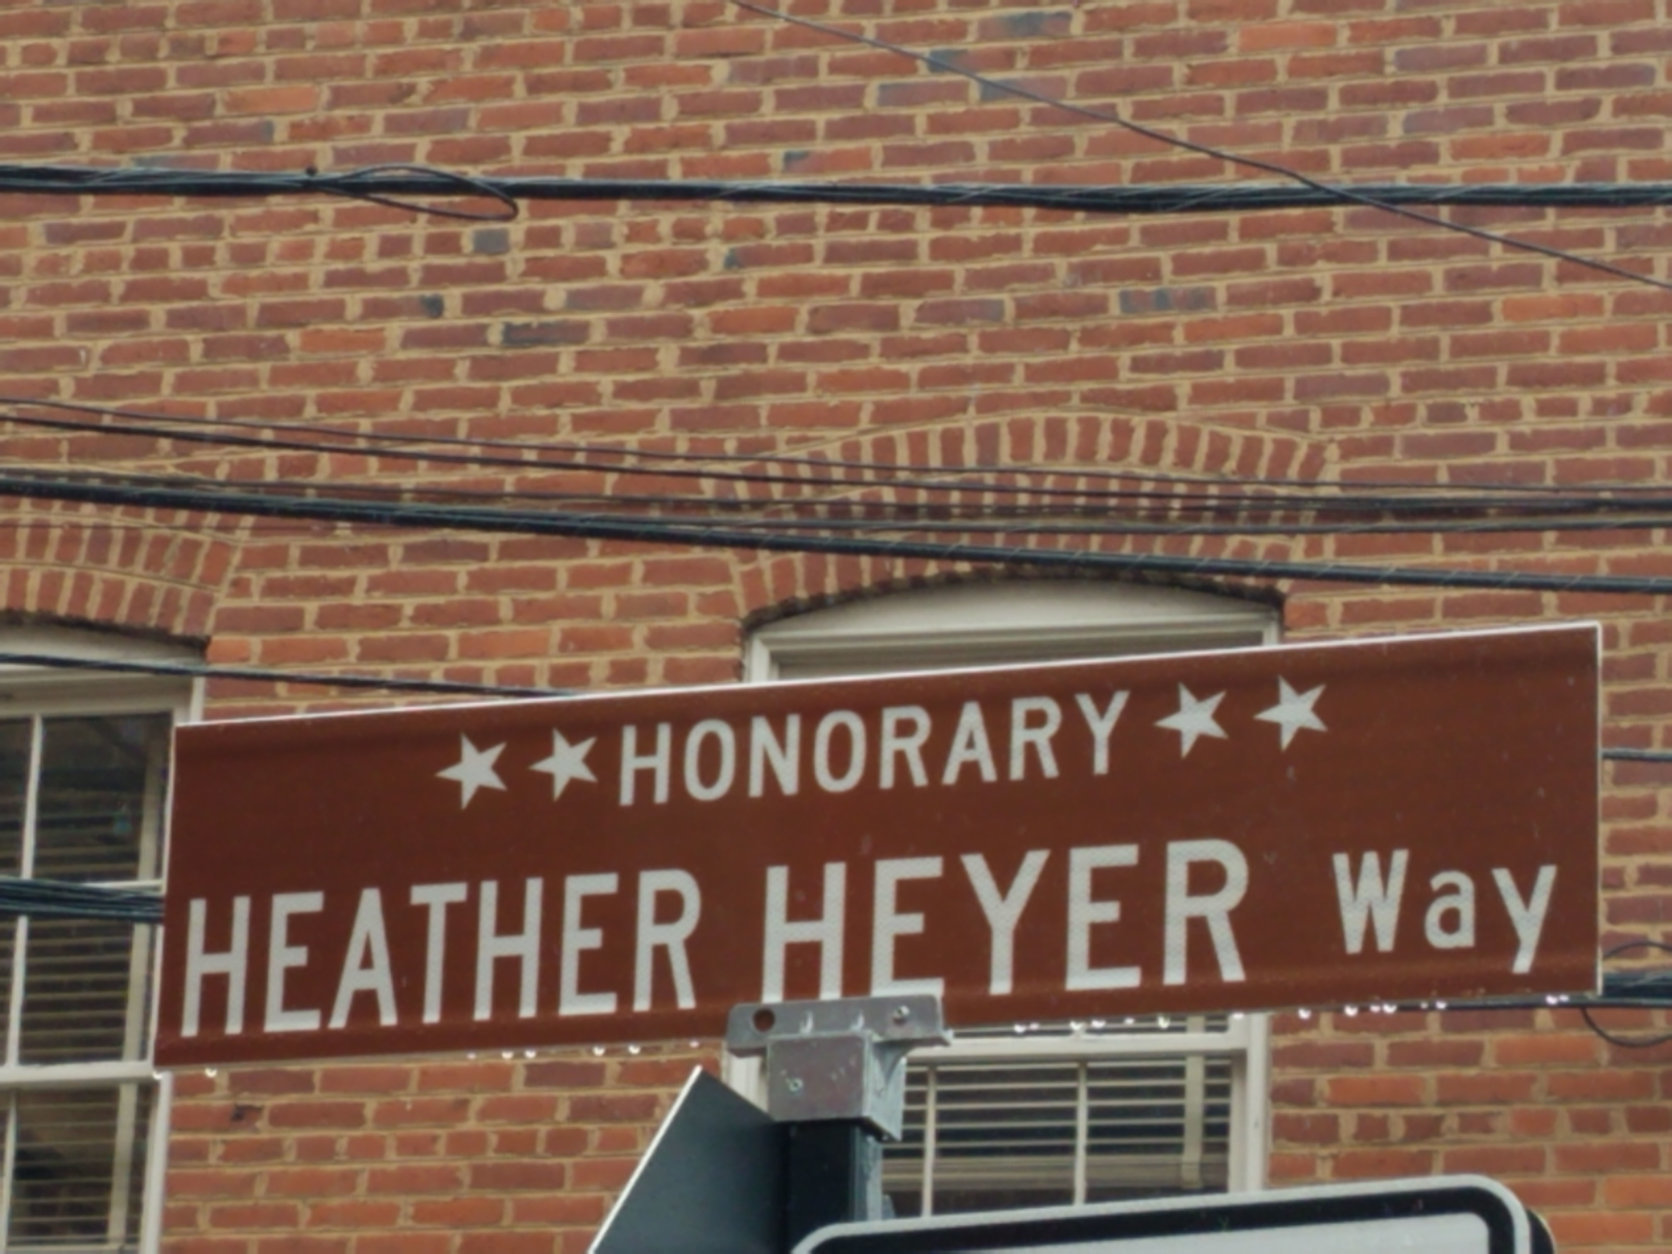 Charlottesville designated a portion of 4th Street in Heyer's memory. (WTOP/Lisa Weiner)